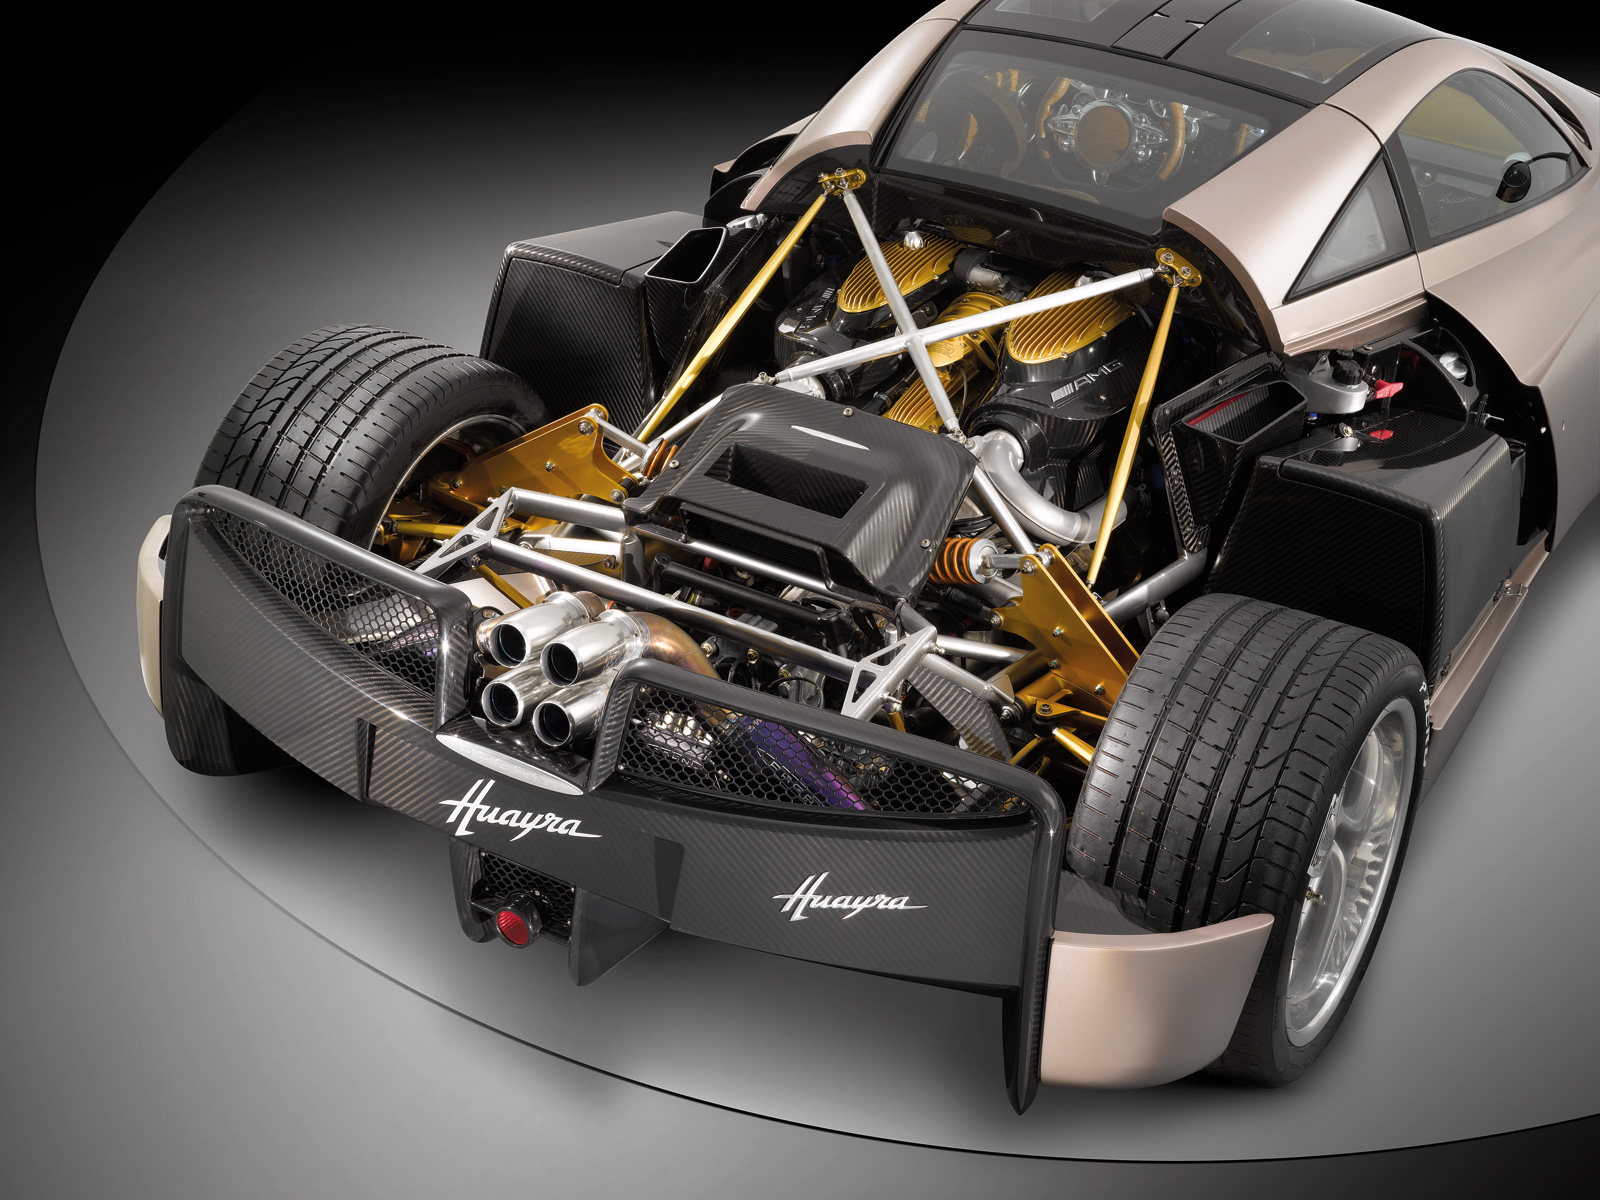 The Pagani Huayra is a 2 door coupe with a starting MSRP of 1,400,000Top Speed 230 MPH, 0-60 3.3 in Seconds